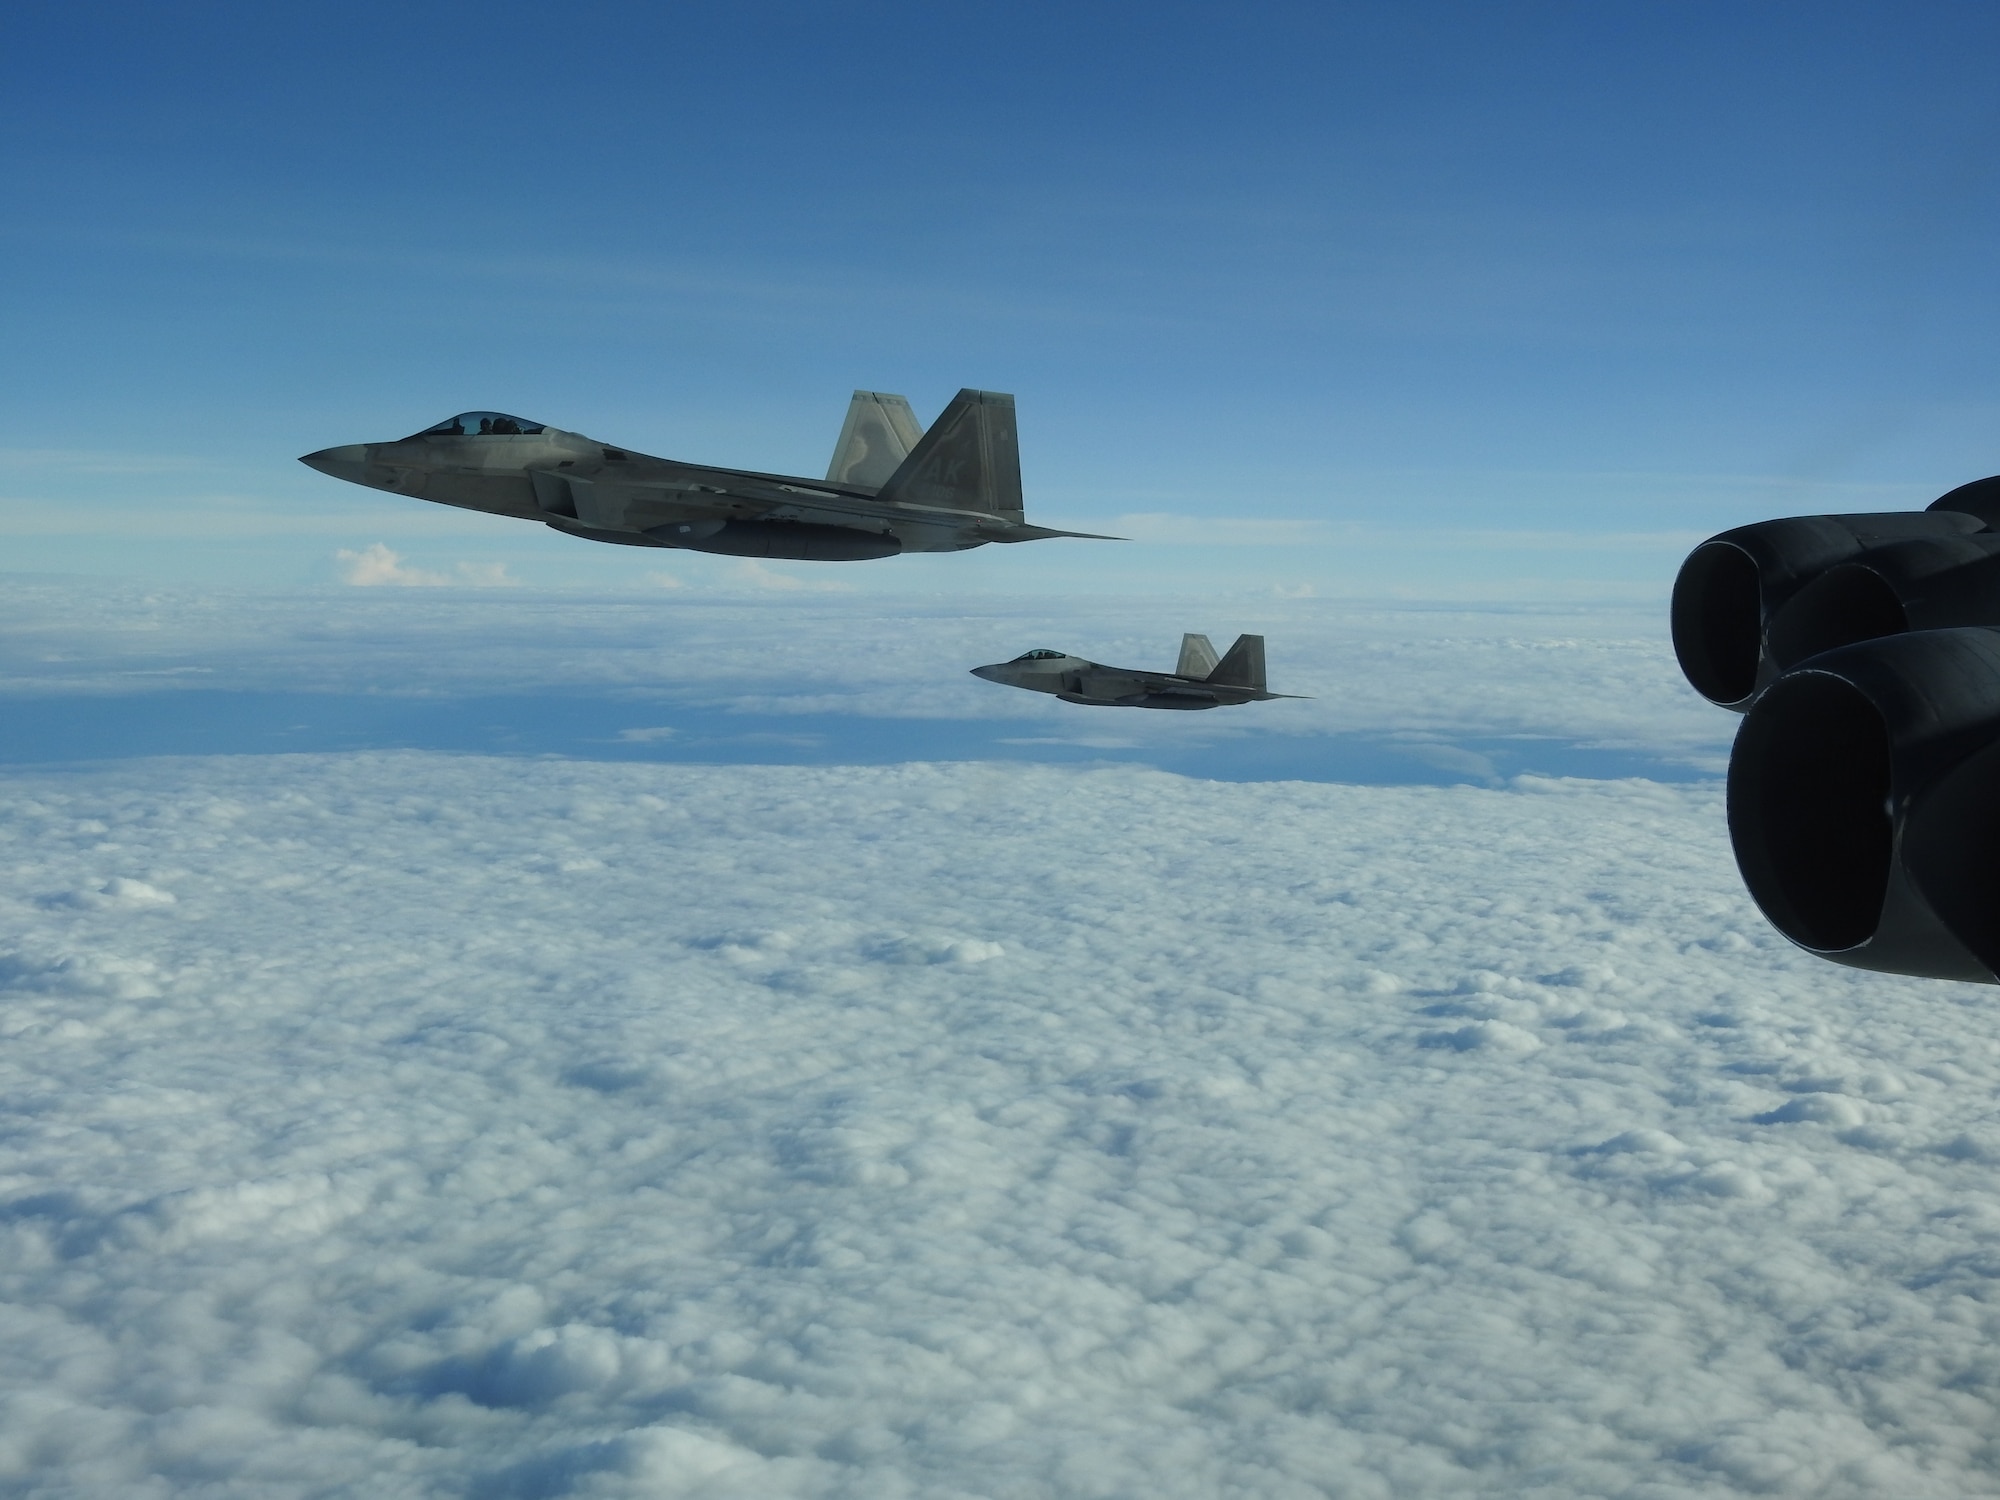 F-22 Raptors escort a B-52 Stratofortress during a North American Aerospace Defense Command (NORAD) mission, June 14, 2020. NORAD routinely conducts intercept training in support of its mission to protect the sovereign airspaces of the United States and Canada. (Courtesy Photo)